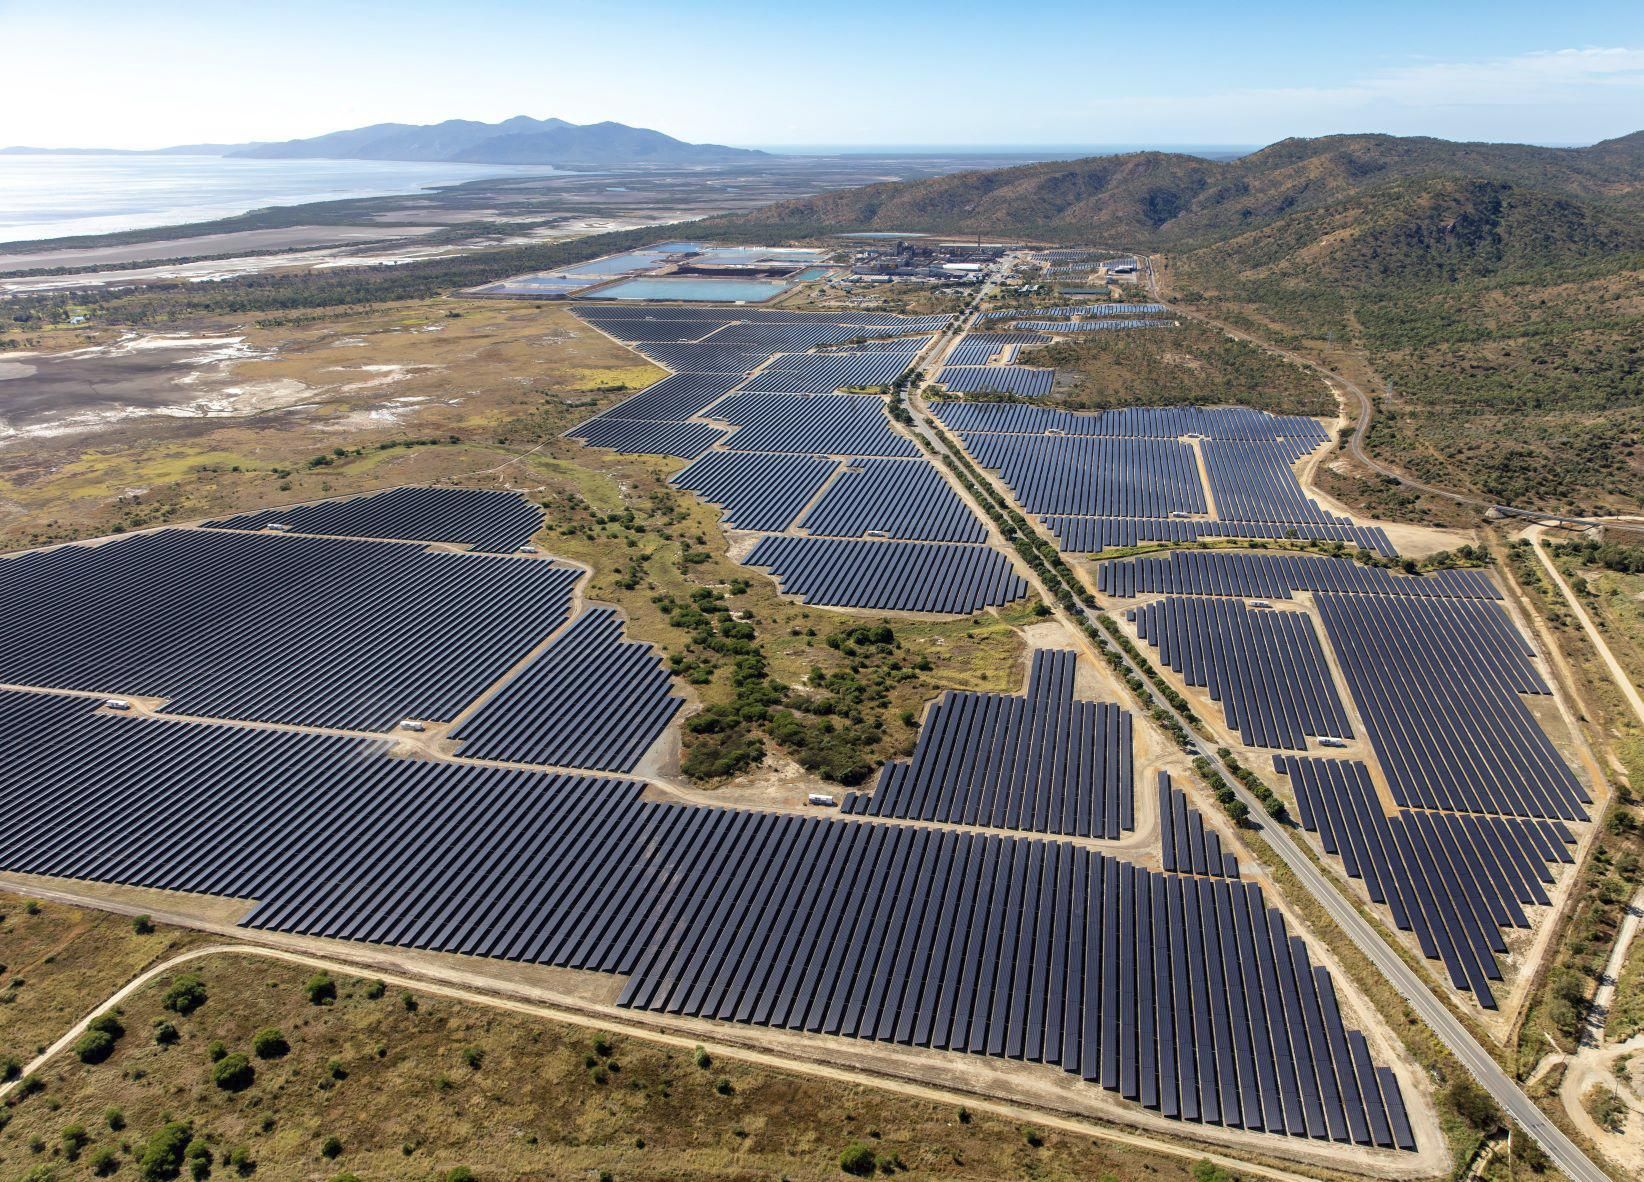 An aerial photo shows a large solar-photovoltaic generating plant.